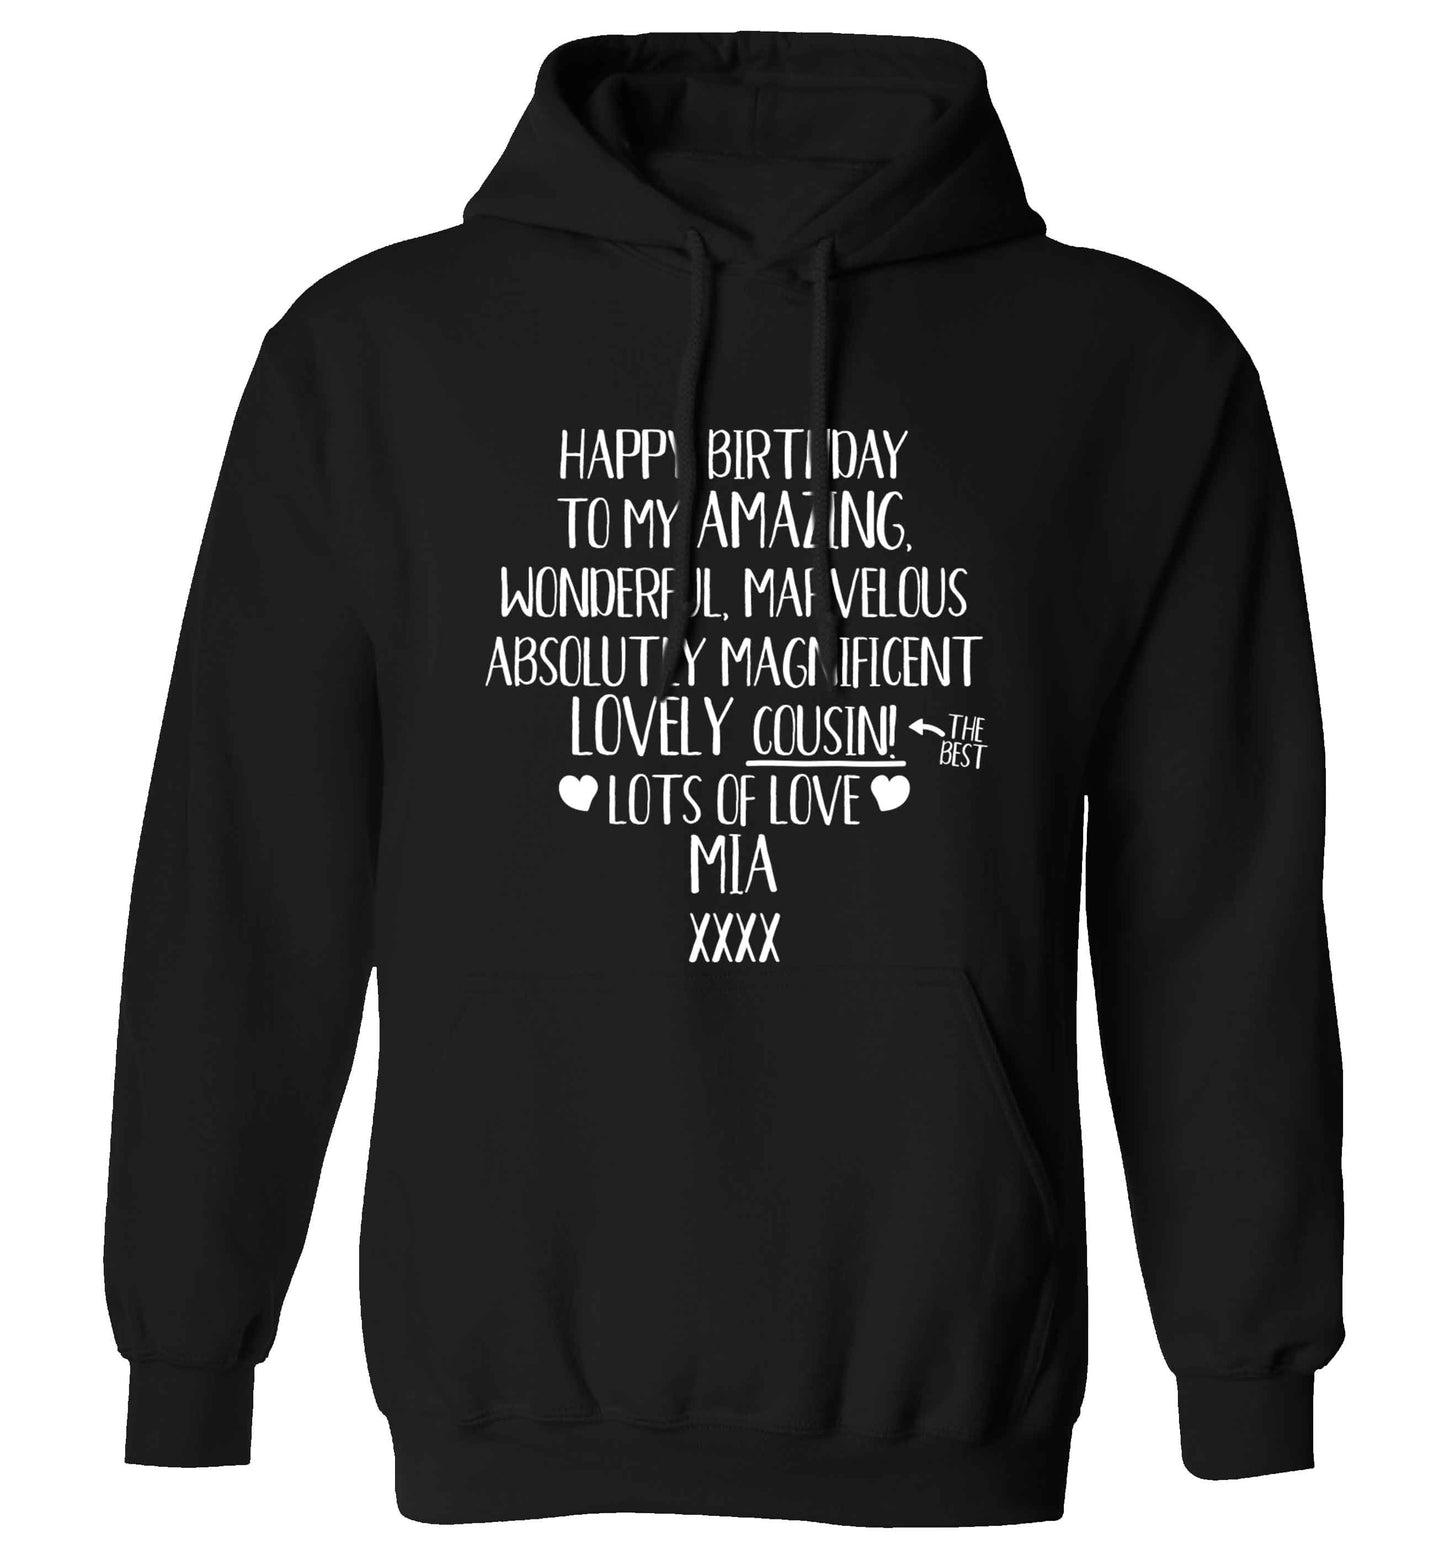 Personalised happy birthday to my amazing, wonderful, lovely cousin adults unisex black hoodie 2XL